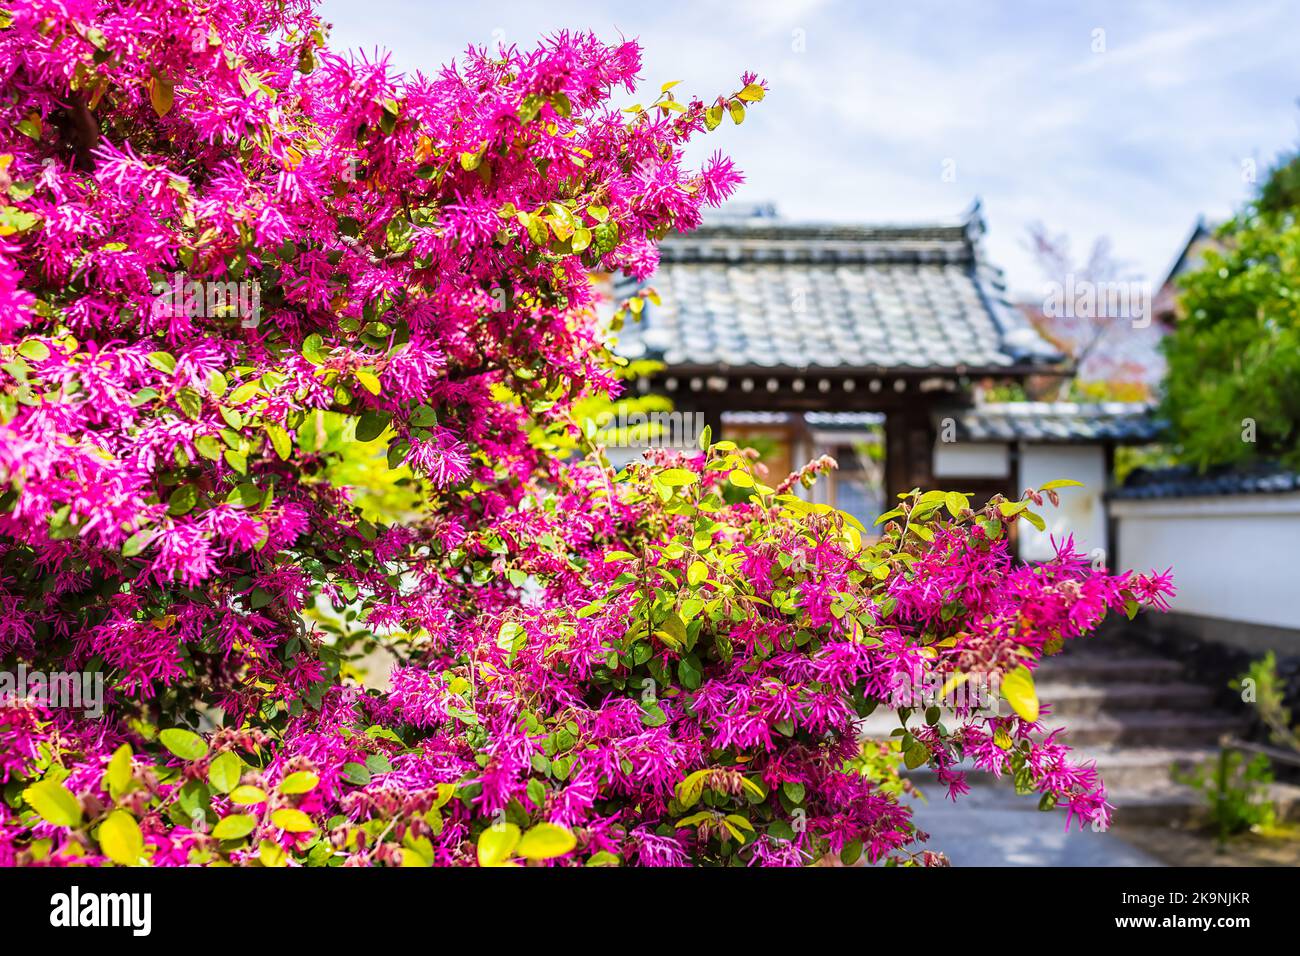 Kyoto, Japan blooming pink Loropetalum chinese fringe flowers foreground of trees in spring garden park in Arashiyama with temple shrine building roof Stock Photo